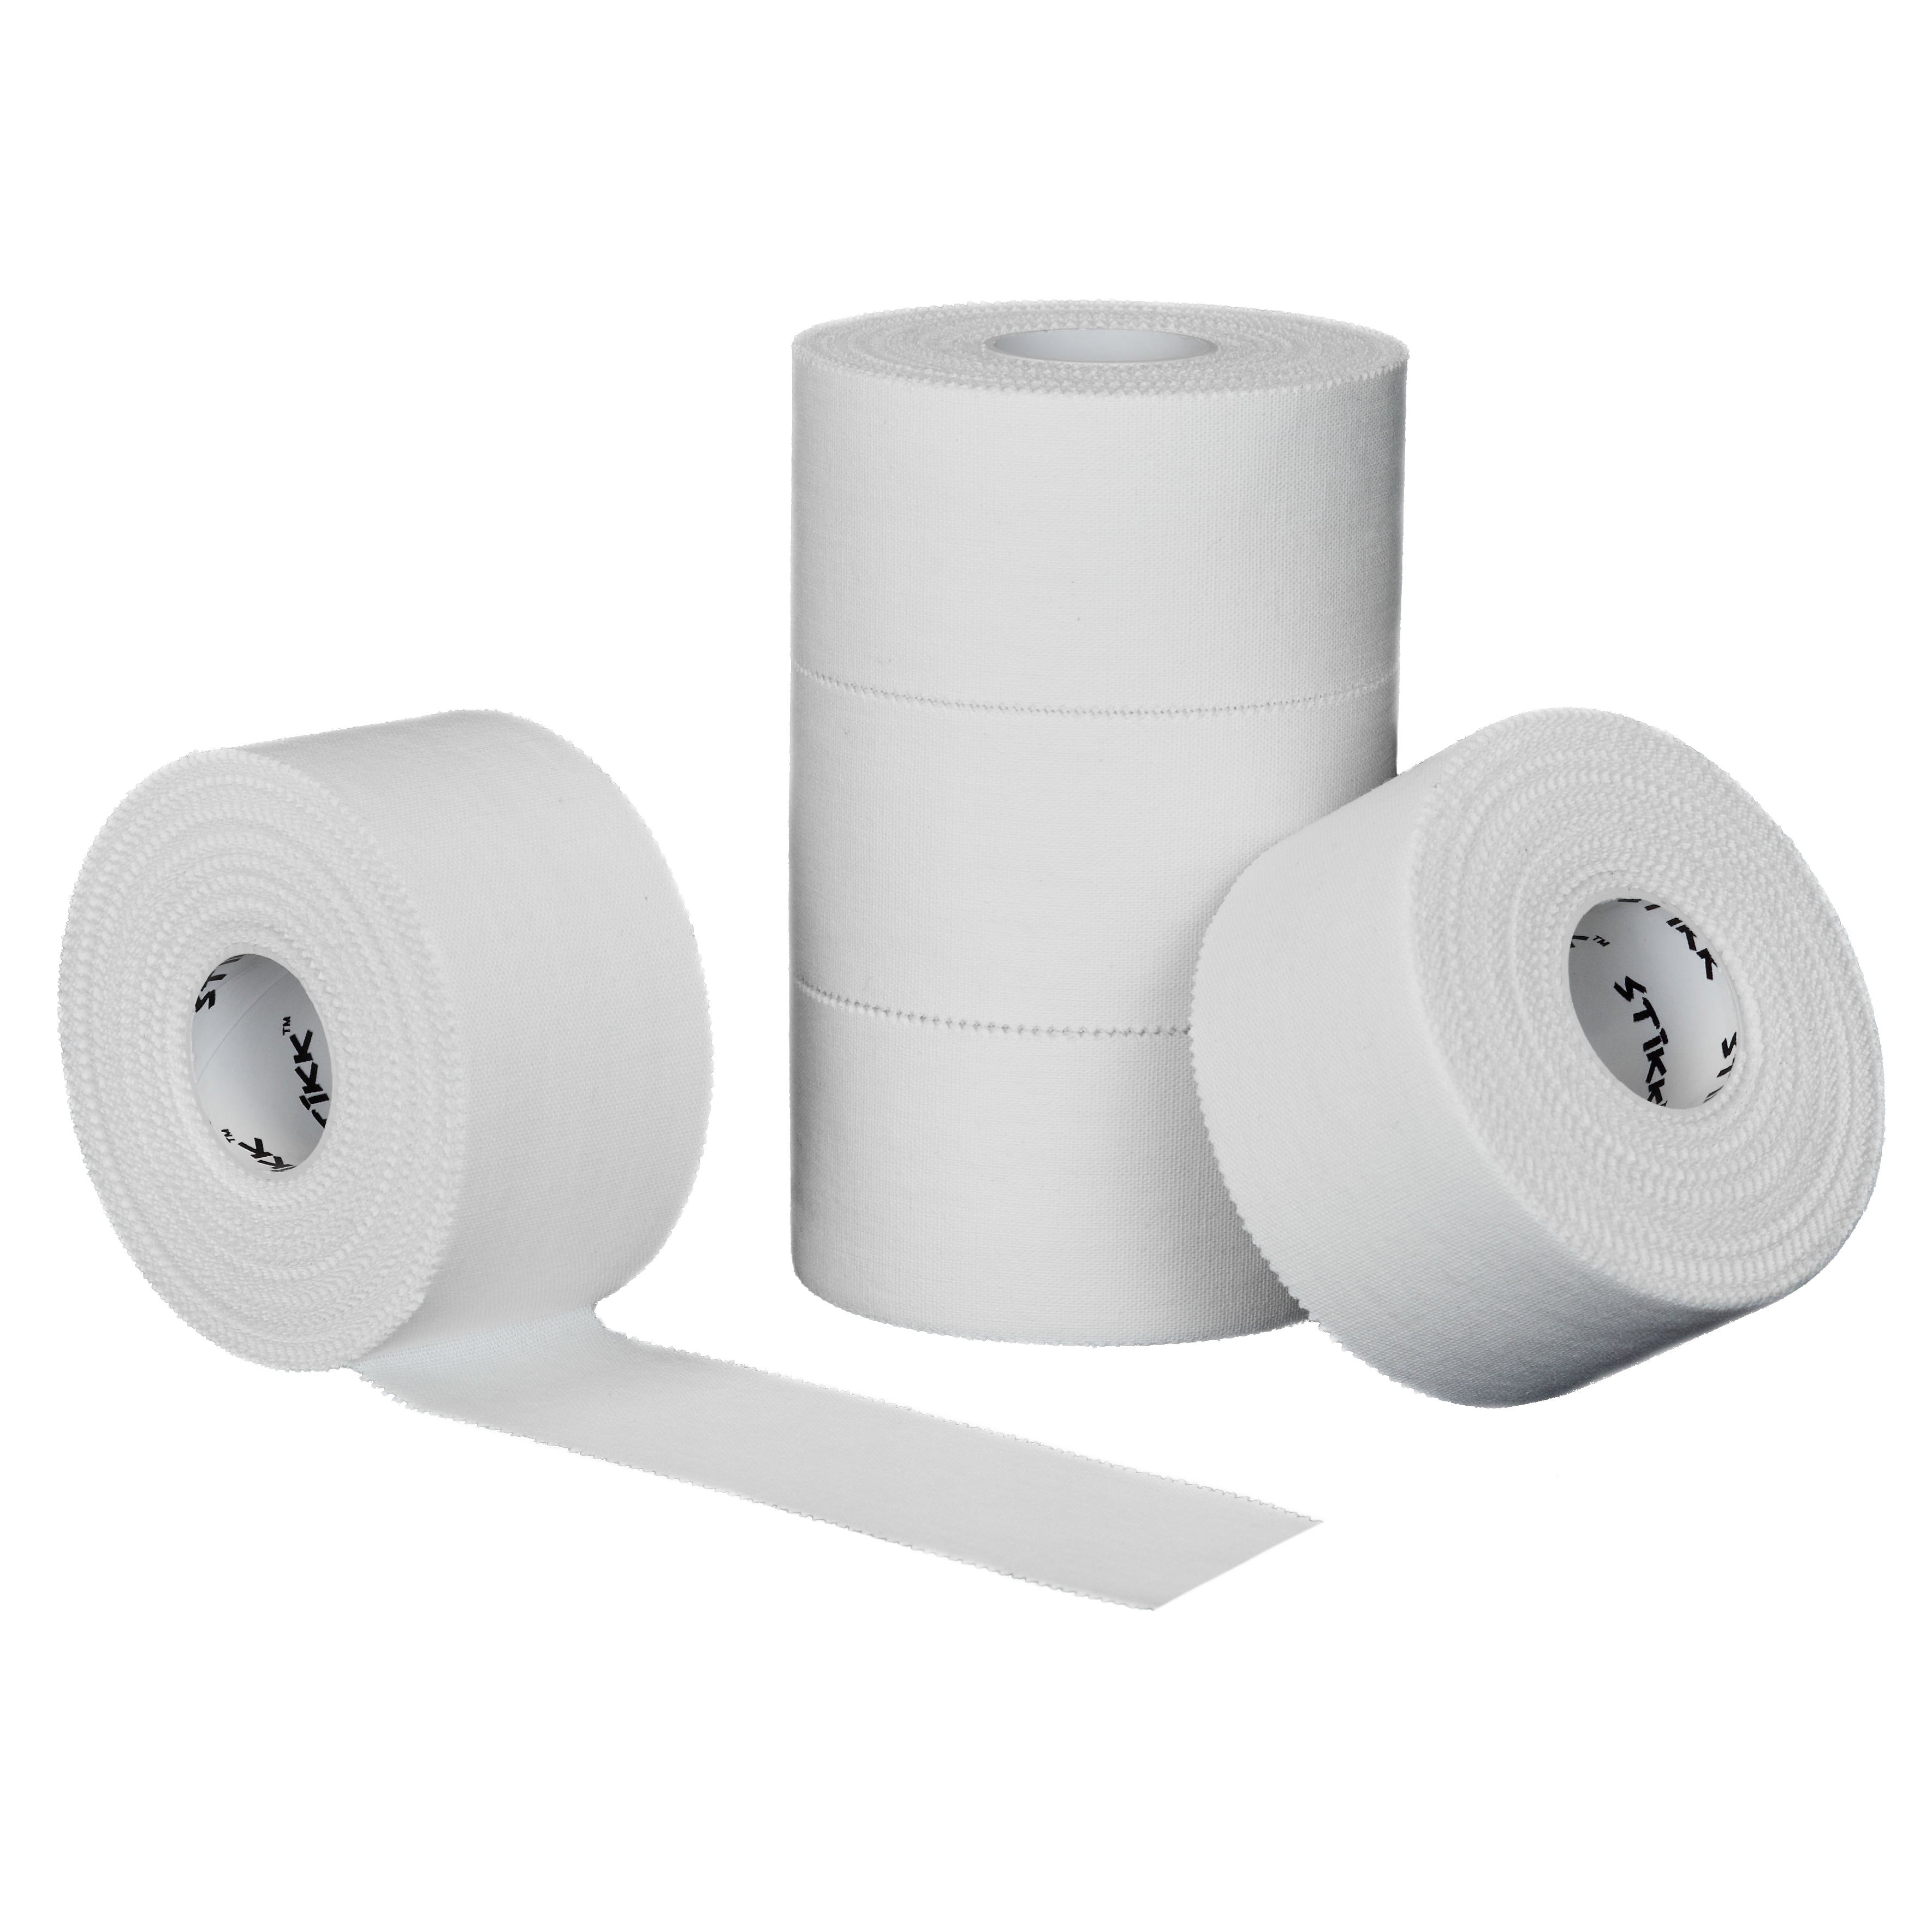 2 Rolls of Sports Tape White Cloth Boxing Tape Pro Quality 1" x 27 yd 